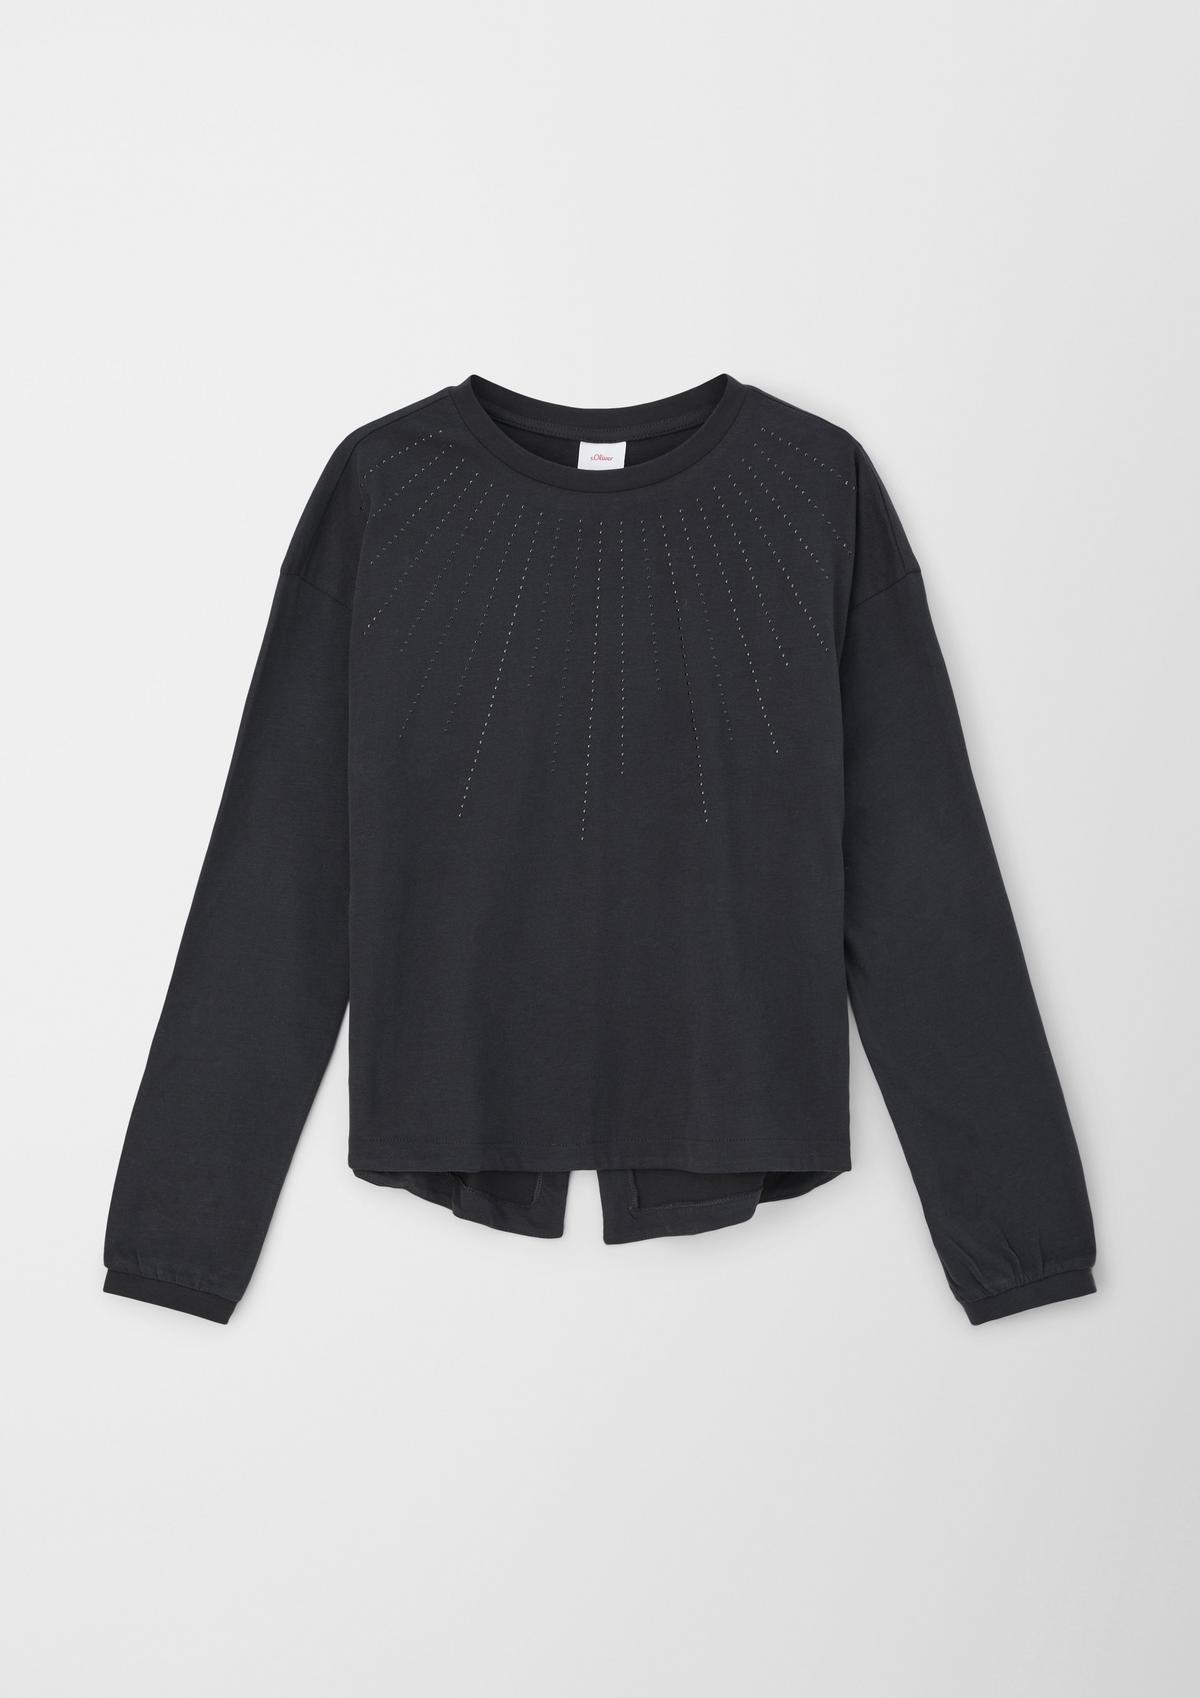 s.Oliver Long sleeve top with a studded trim